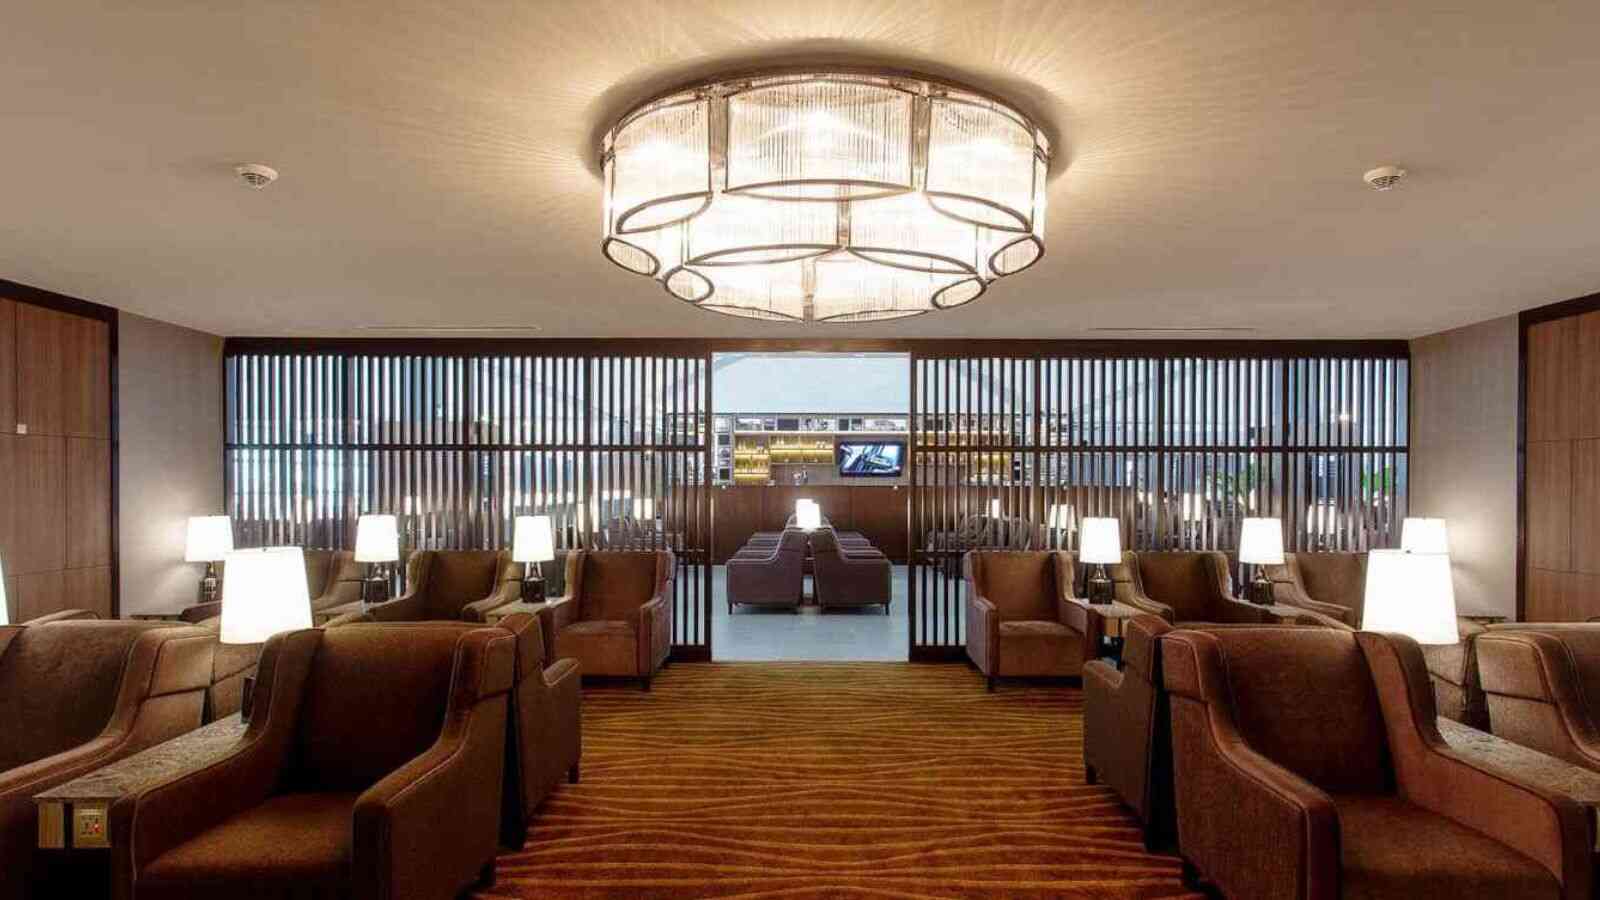 https://airportslounges.com/blog/which-airports-have-loungekey-lounges/